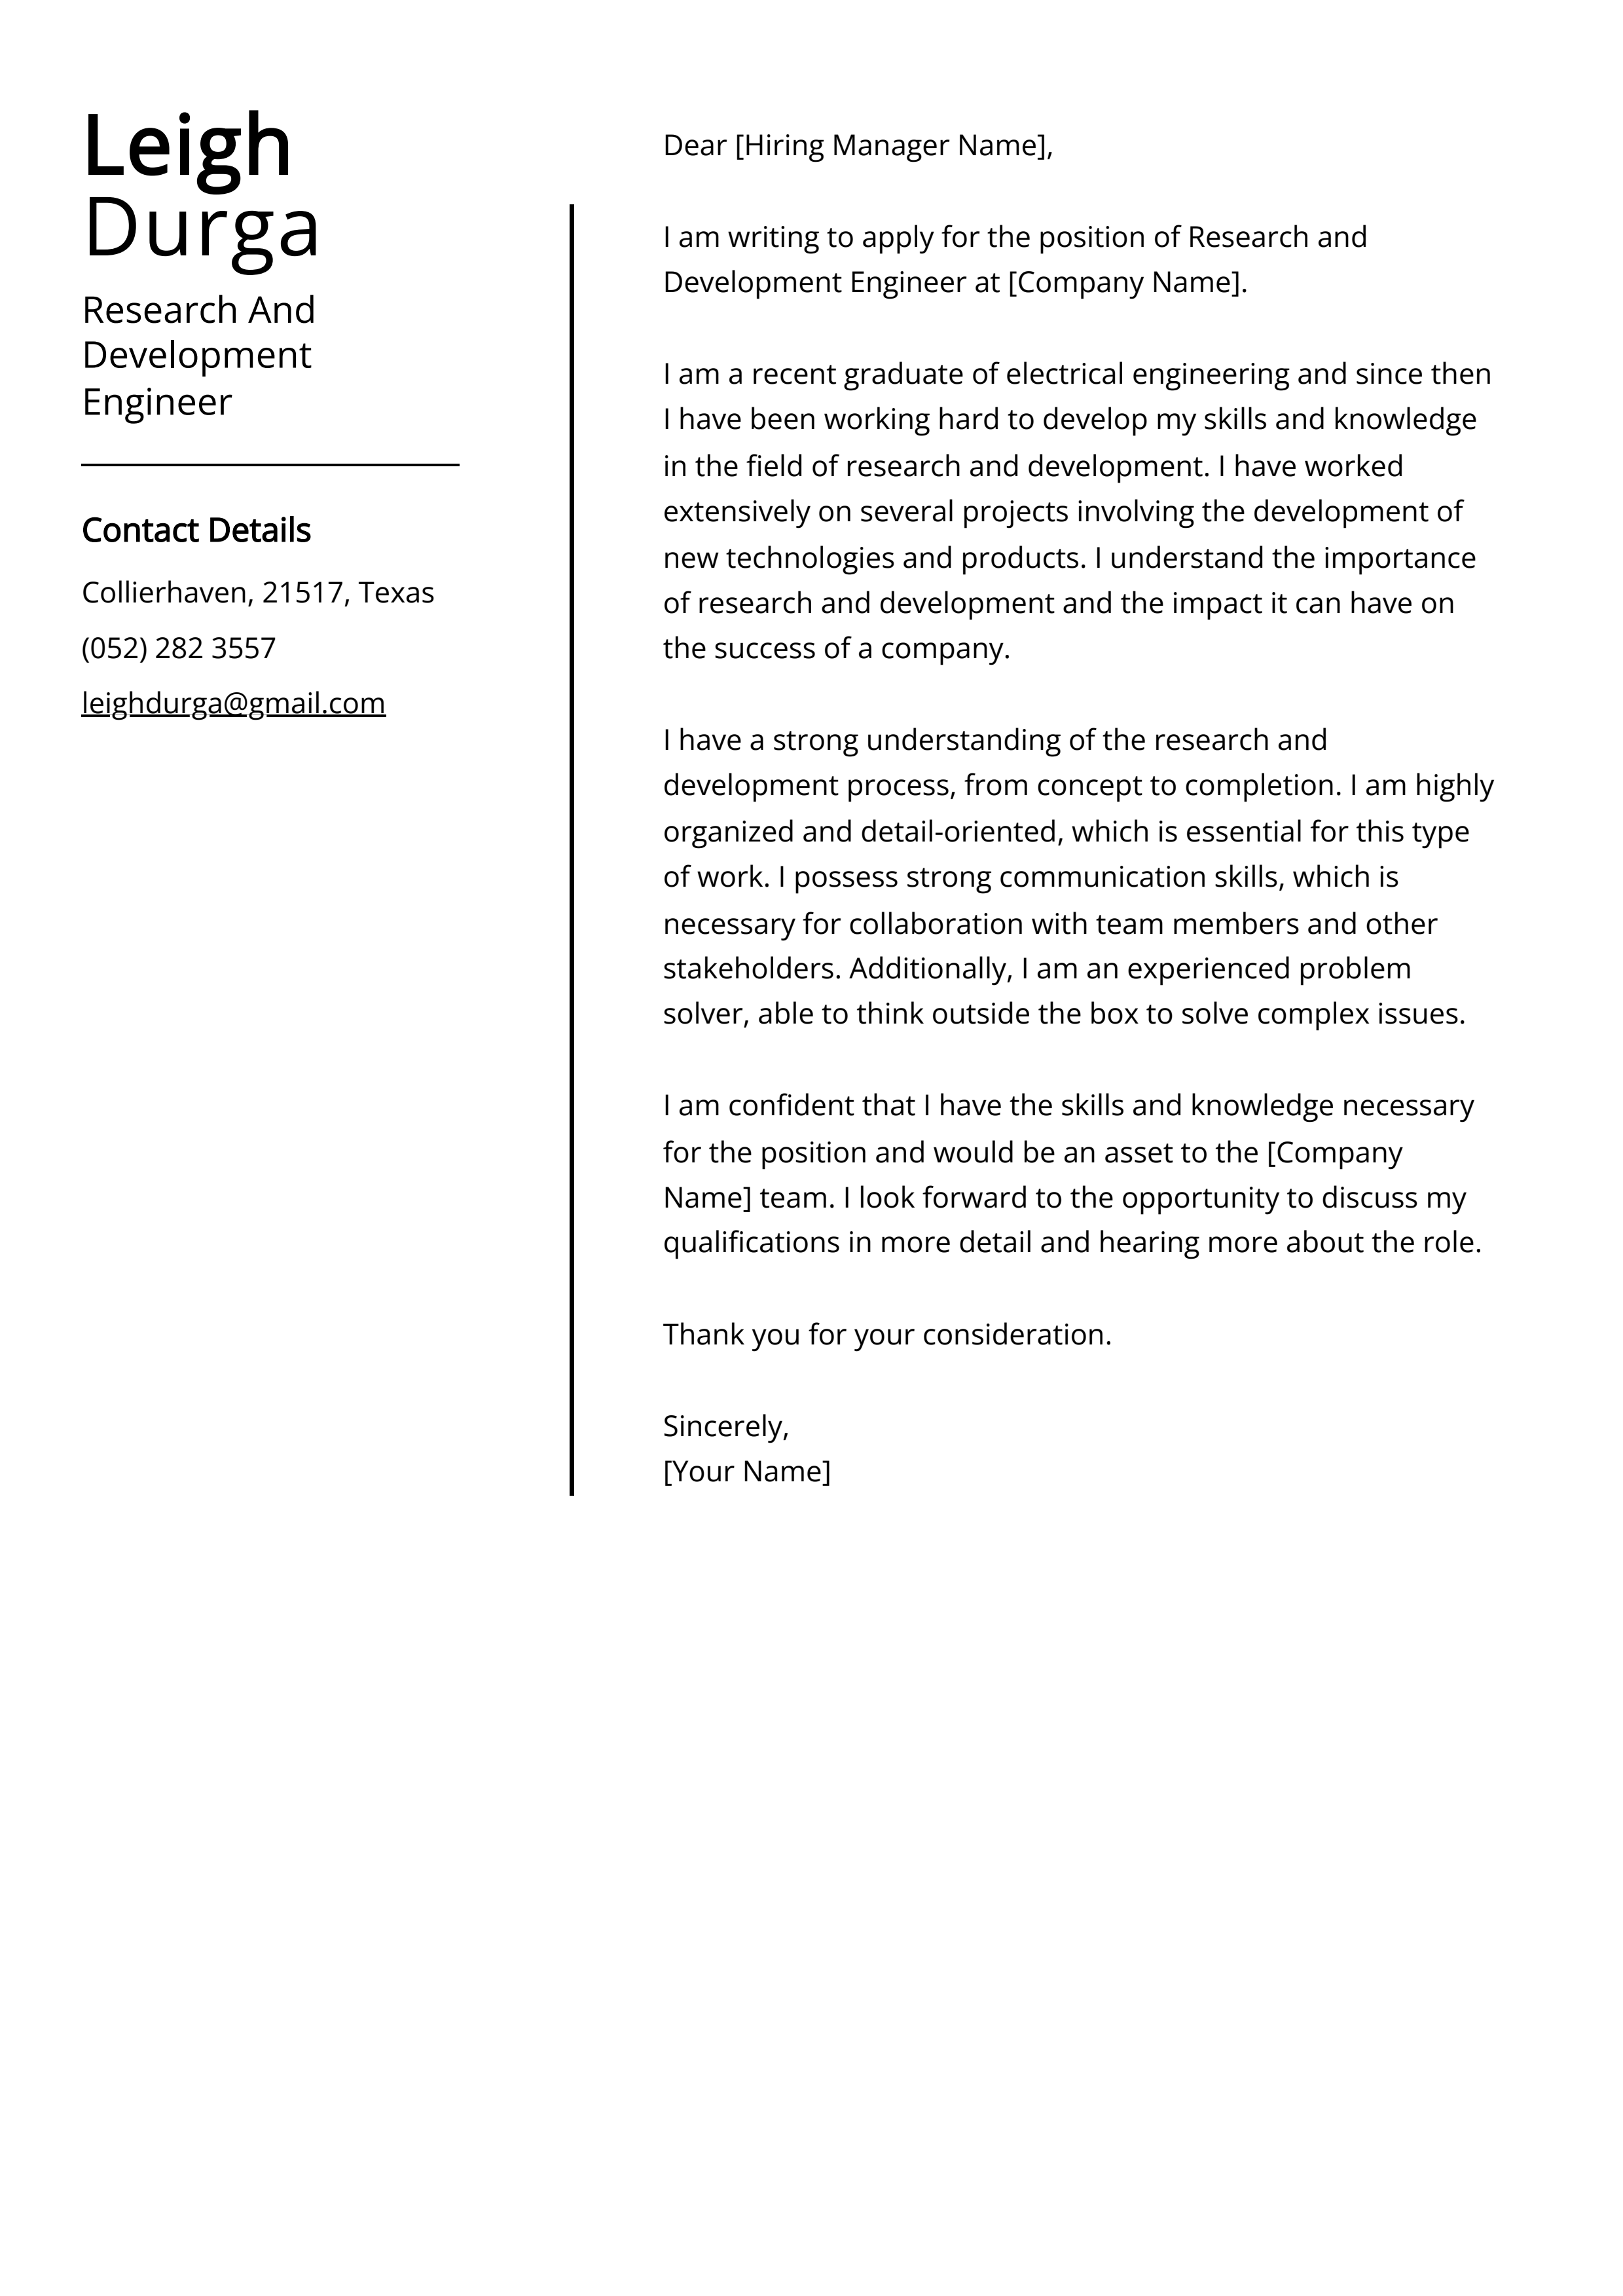 Research And Development Engineer Cover Letter Example